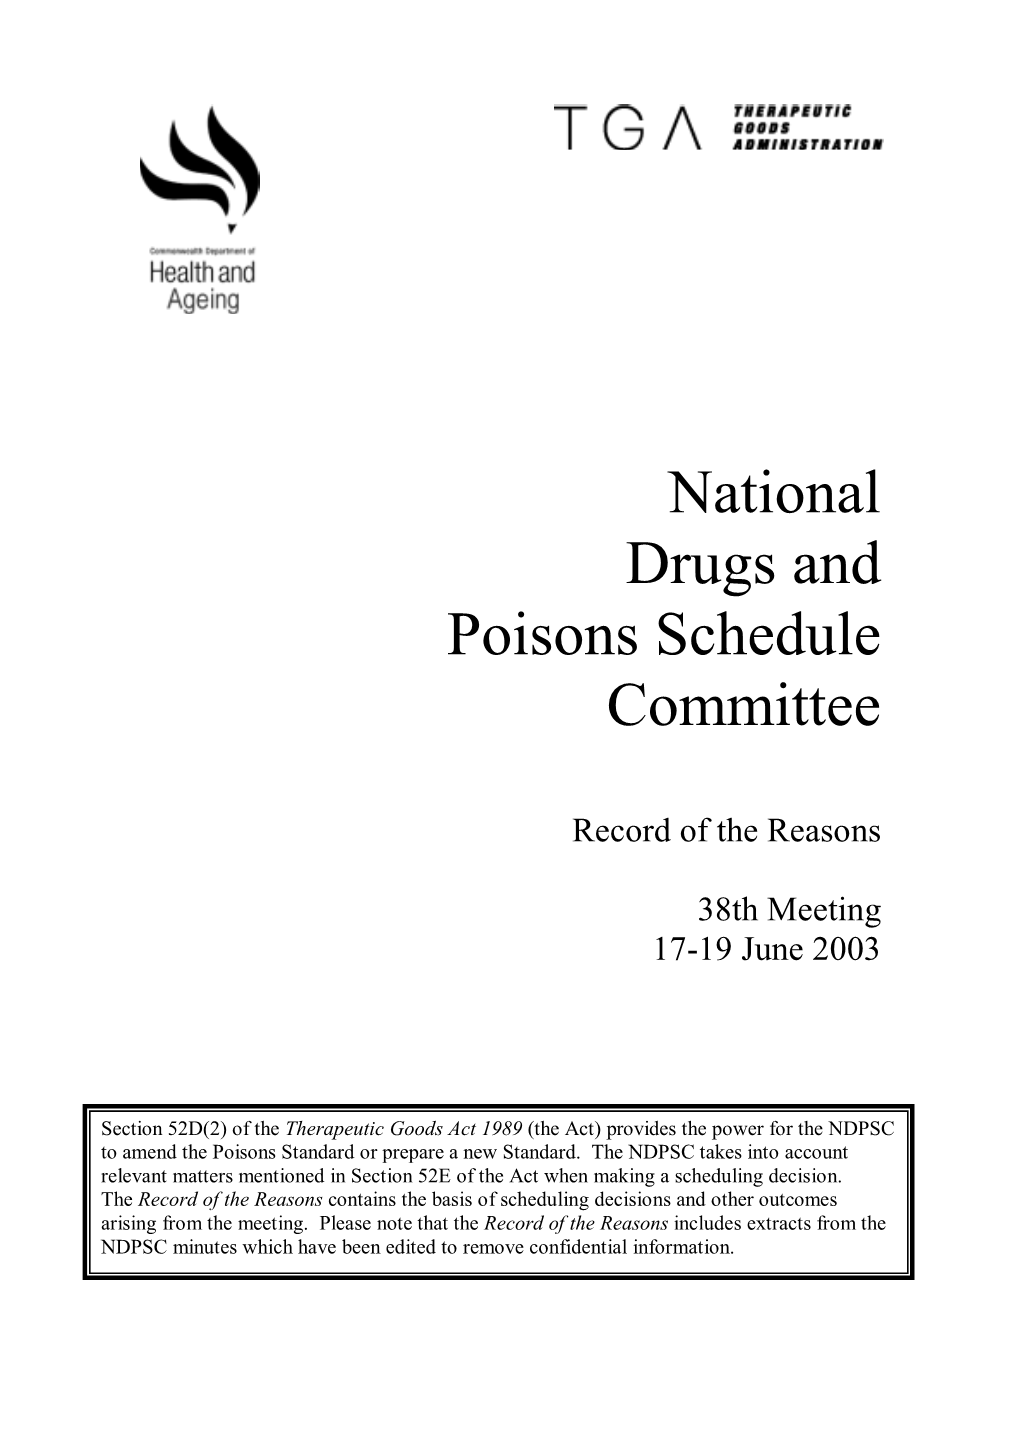 National Drugs and Poisons Schedule Committee